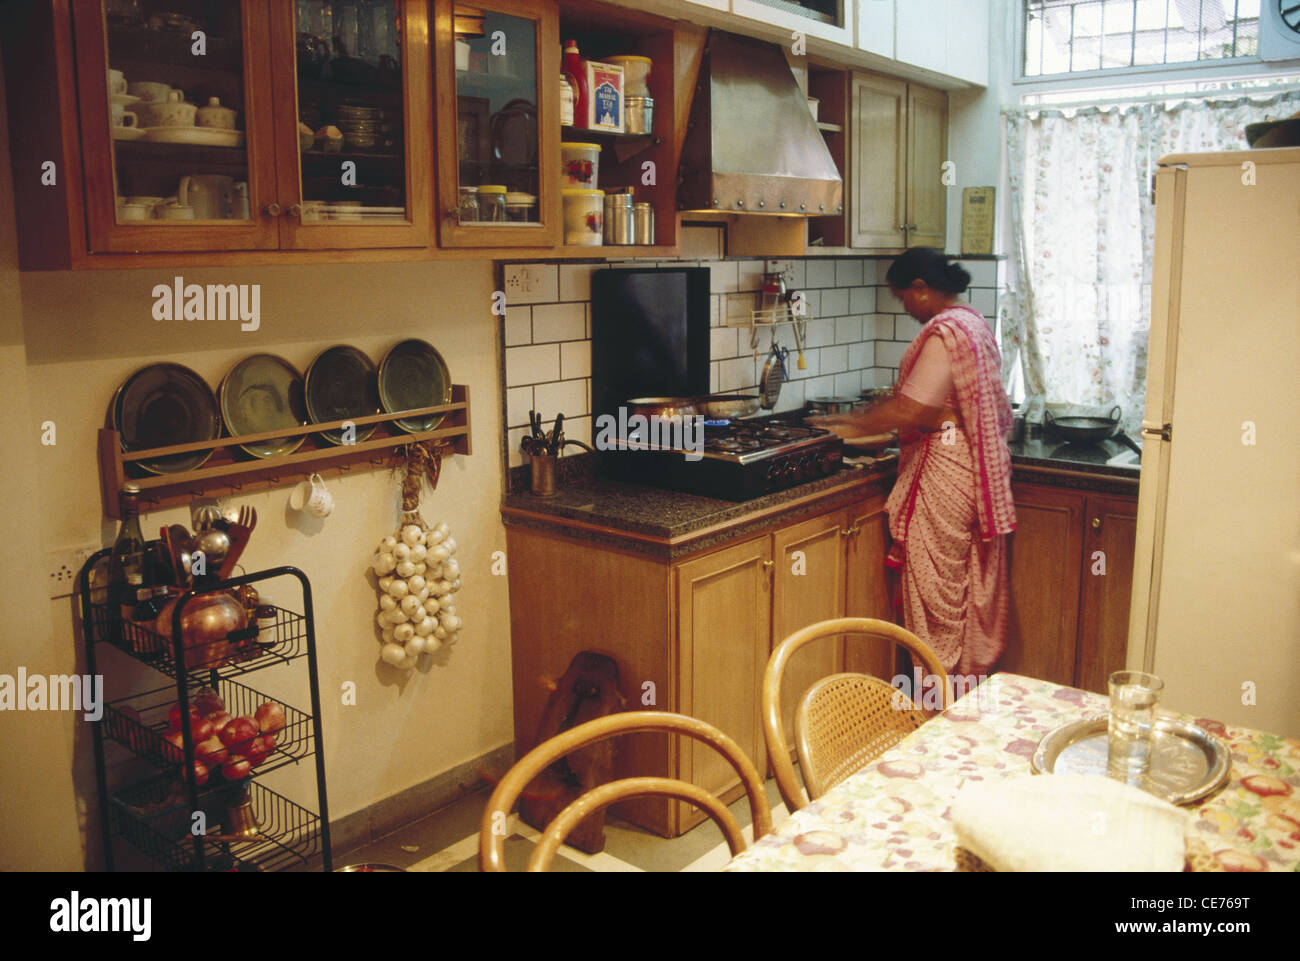 Indian kitchen ; woman cooking in higher middle class family kitchen